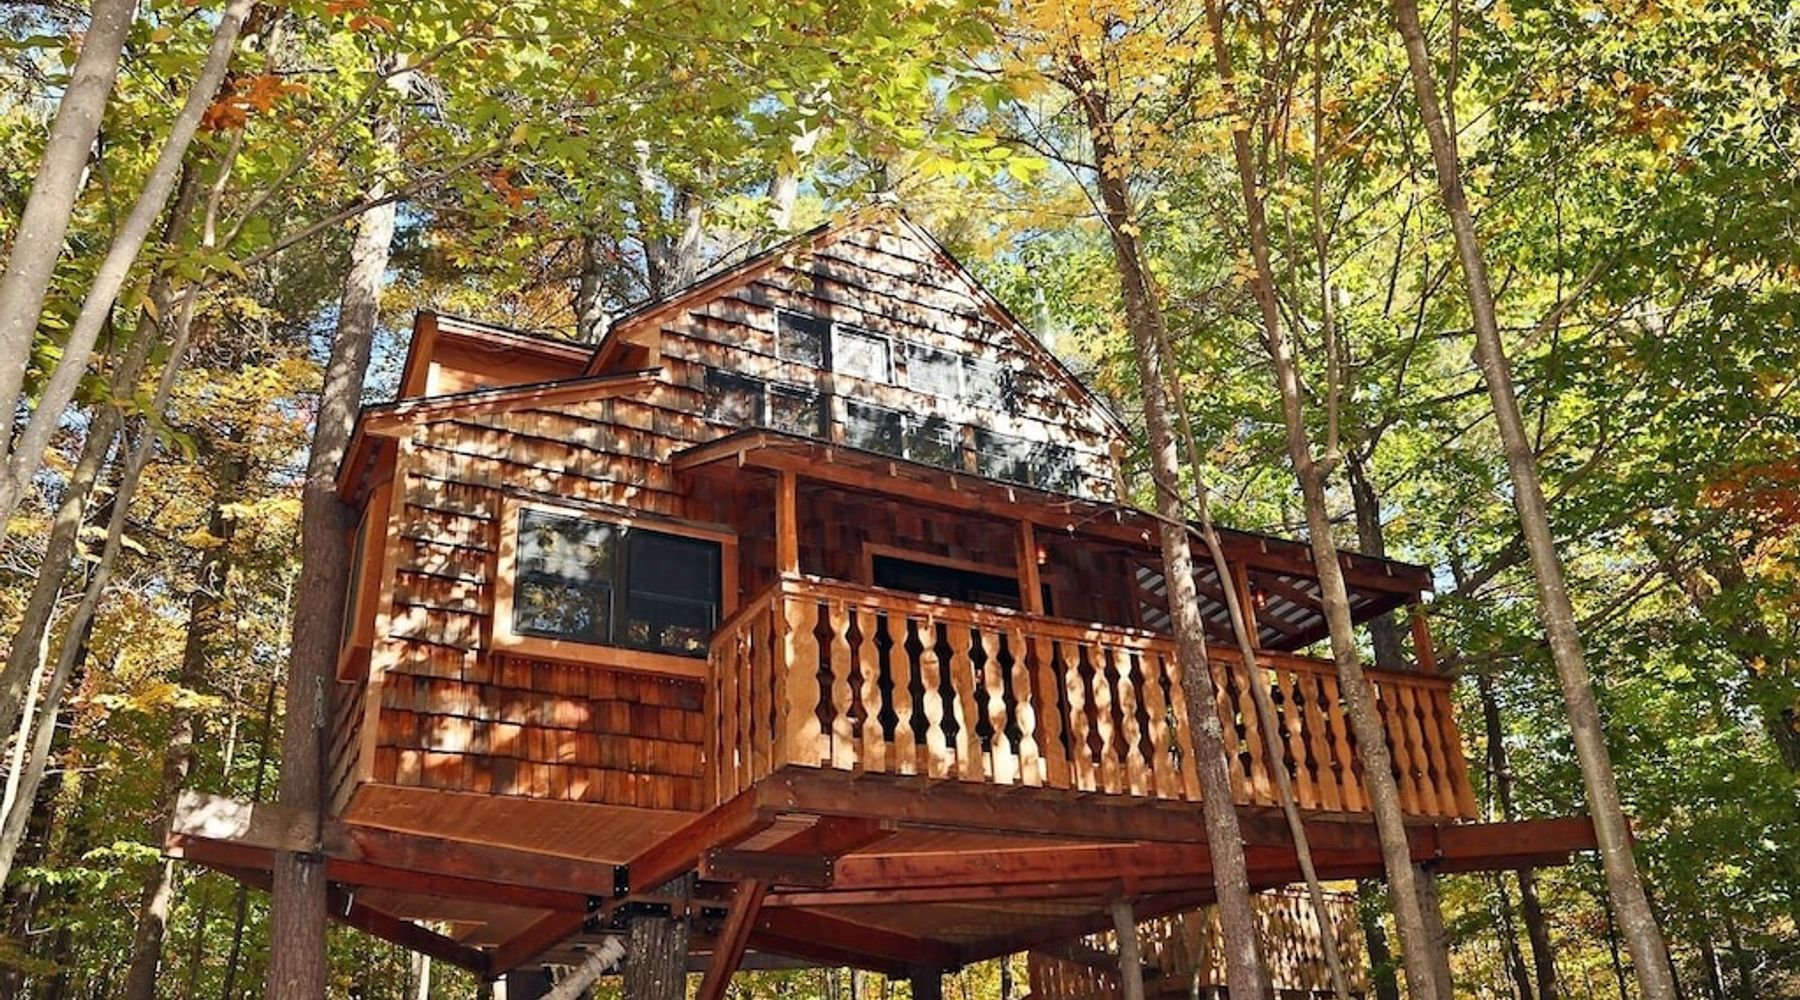 The Best Treehouses In The US

Luxurious Two-Story Treehouse | Minutes from Lake Sunapee | Peaceful

Location: Newbury, New Hampshire